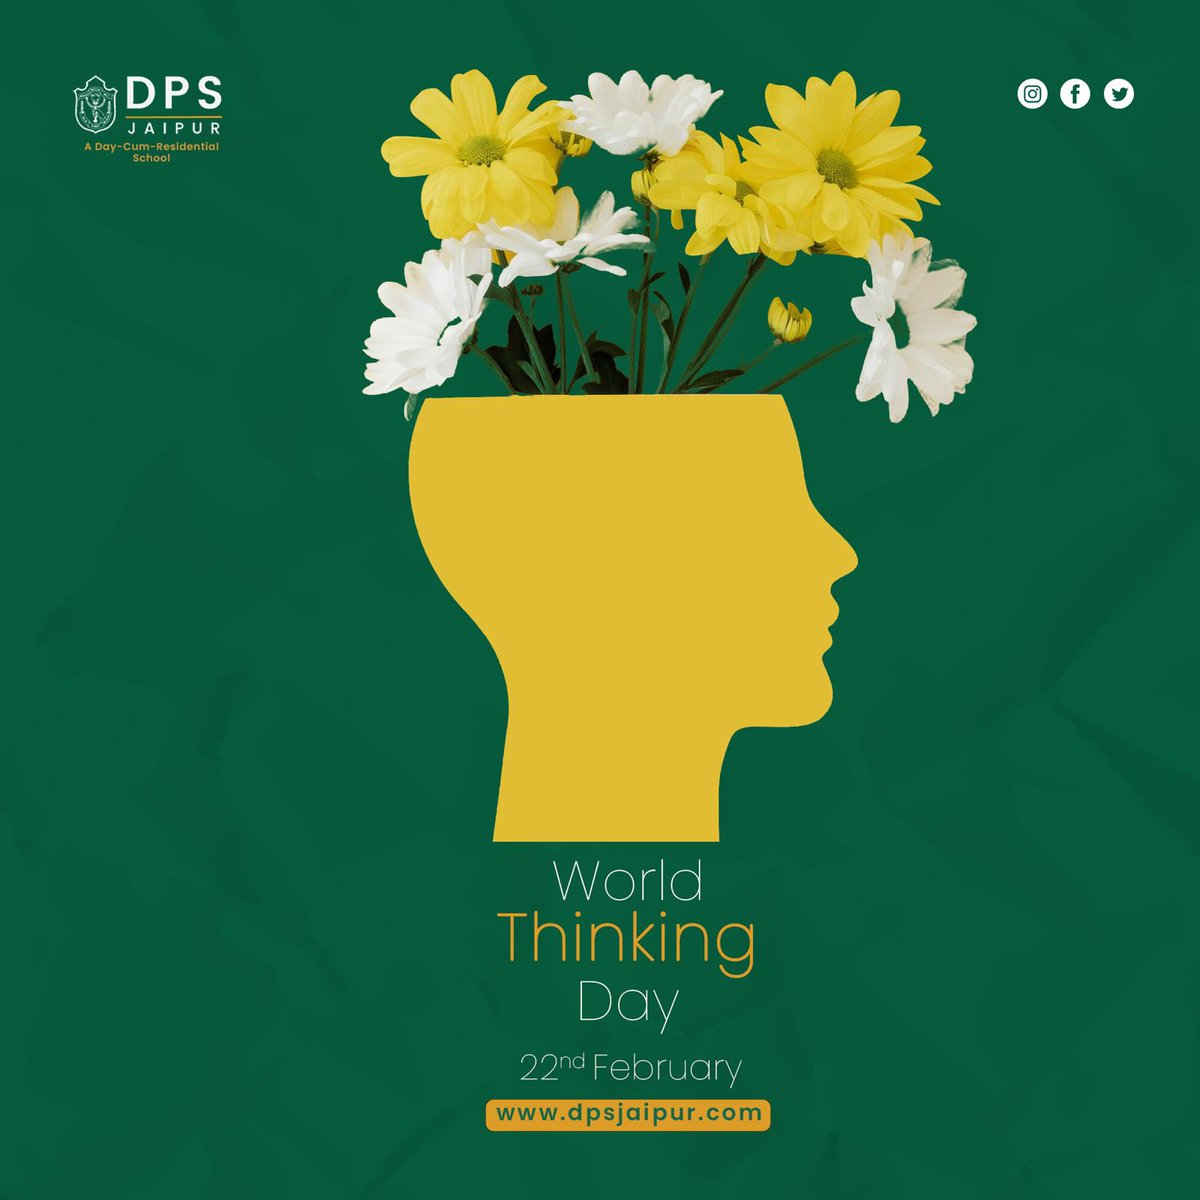 Today, DPS Jaipur joins millions of Girl Guides and Girl Scouts around the world in celebrating World Thinking Day, a day dedicated to promoting friendship, diversity, and global citizenship
#WorldThinkingDay #GlobalCitizenship #Unity #Diversity #DPSJaipur #dps #dpsschools